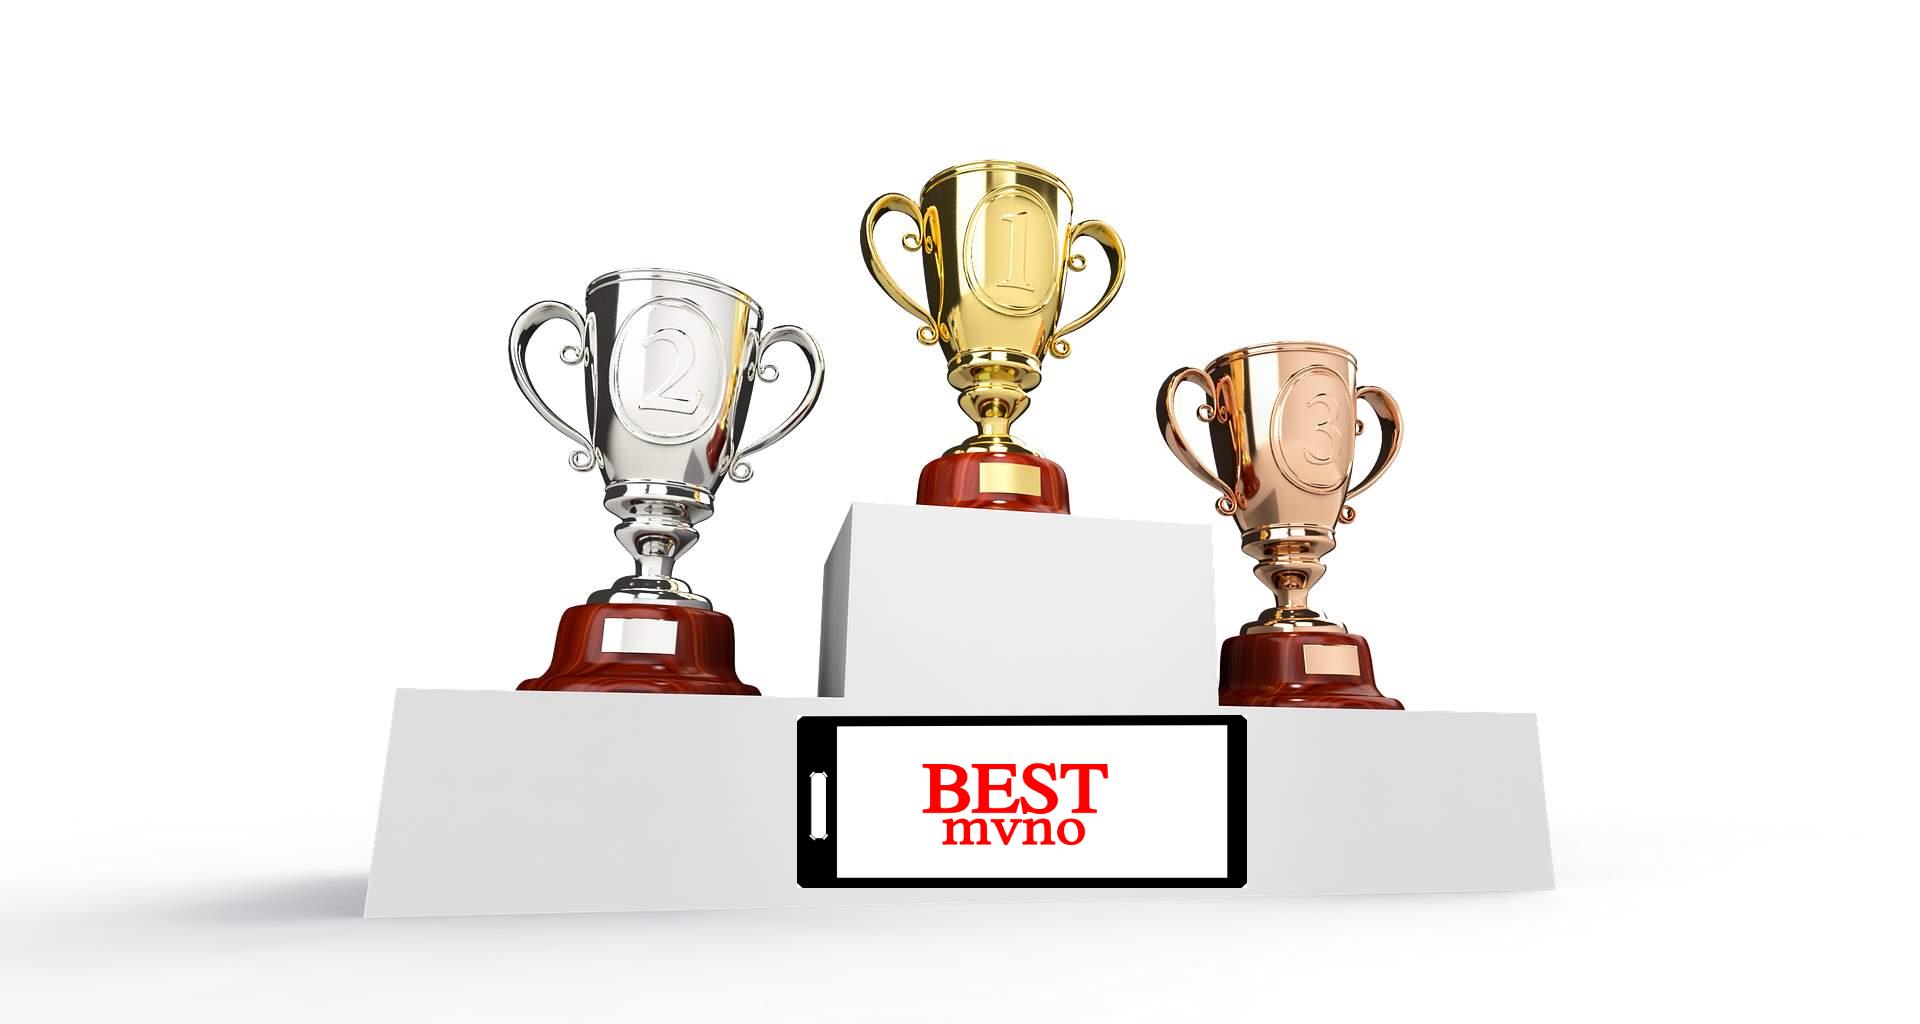 What Makes You The Best MVNO?